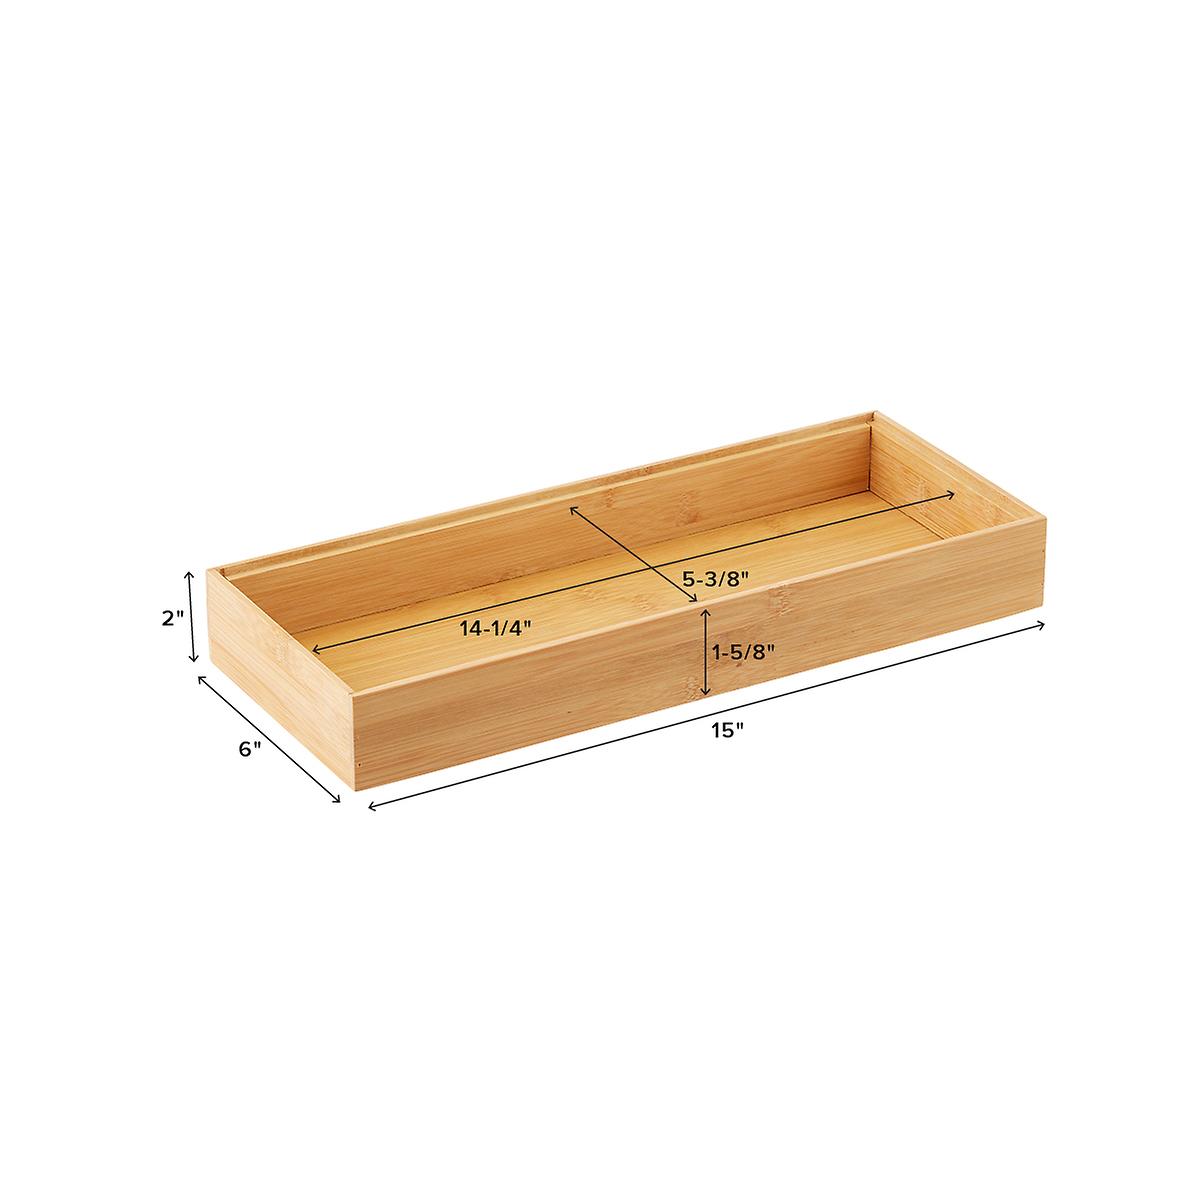 12" x 18" Bamboo Drawer Organizer Starter Kit The Container Store